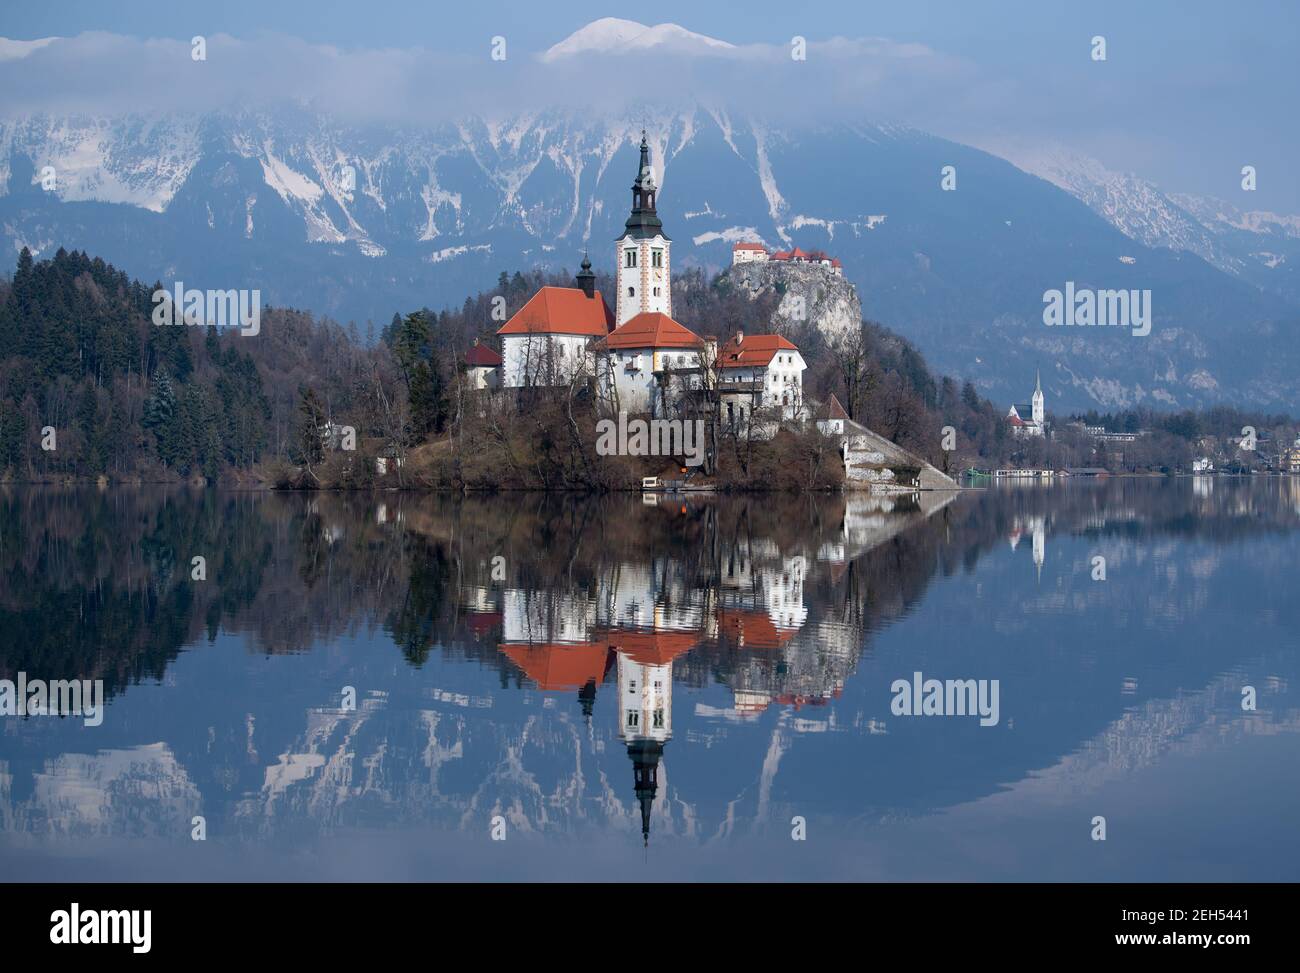 Bled, Slovenia. 19th Feb, 2021. The Church of the Assumption of the Virgin Mary on the island of Blejski Otok in Lake Bled at the foot of the Pokljuka plateau. Bled Castle can be seen in the background. The Biathlon World Championships will be held in Pokljuka from 10-21 February. Credit: Sven Hoppe/dpa/Alamy Live News Stock Photo